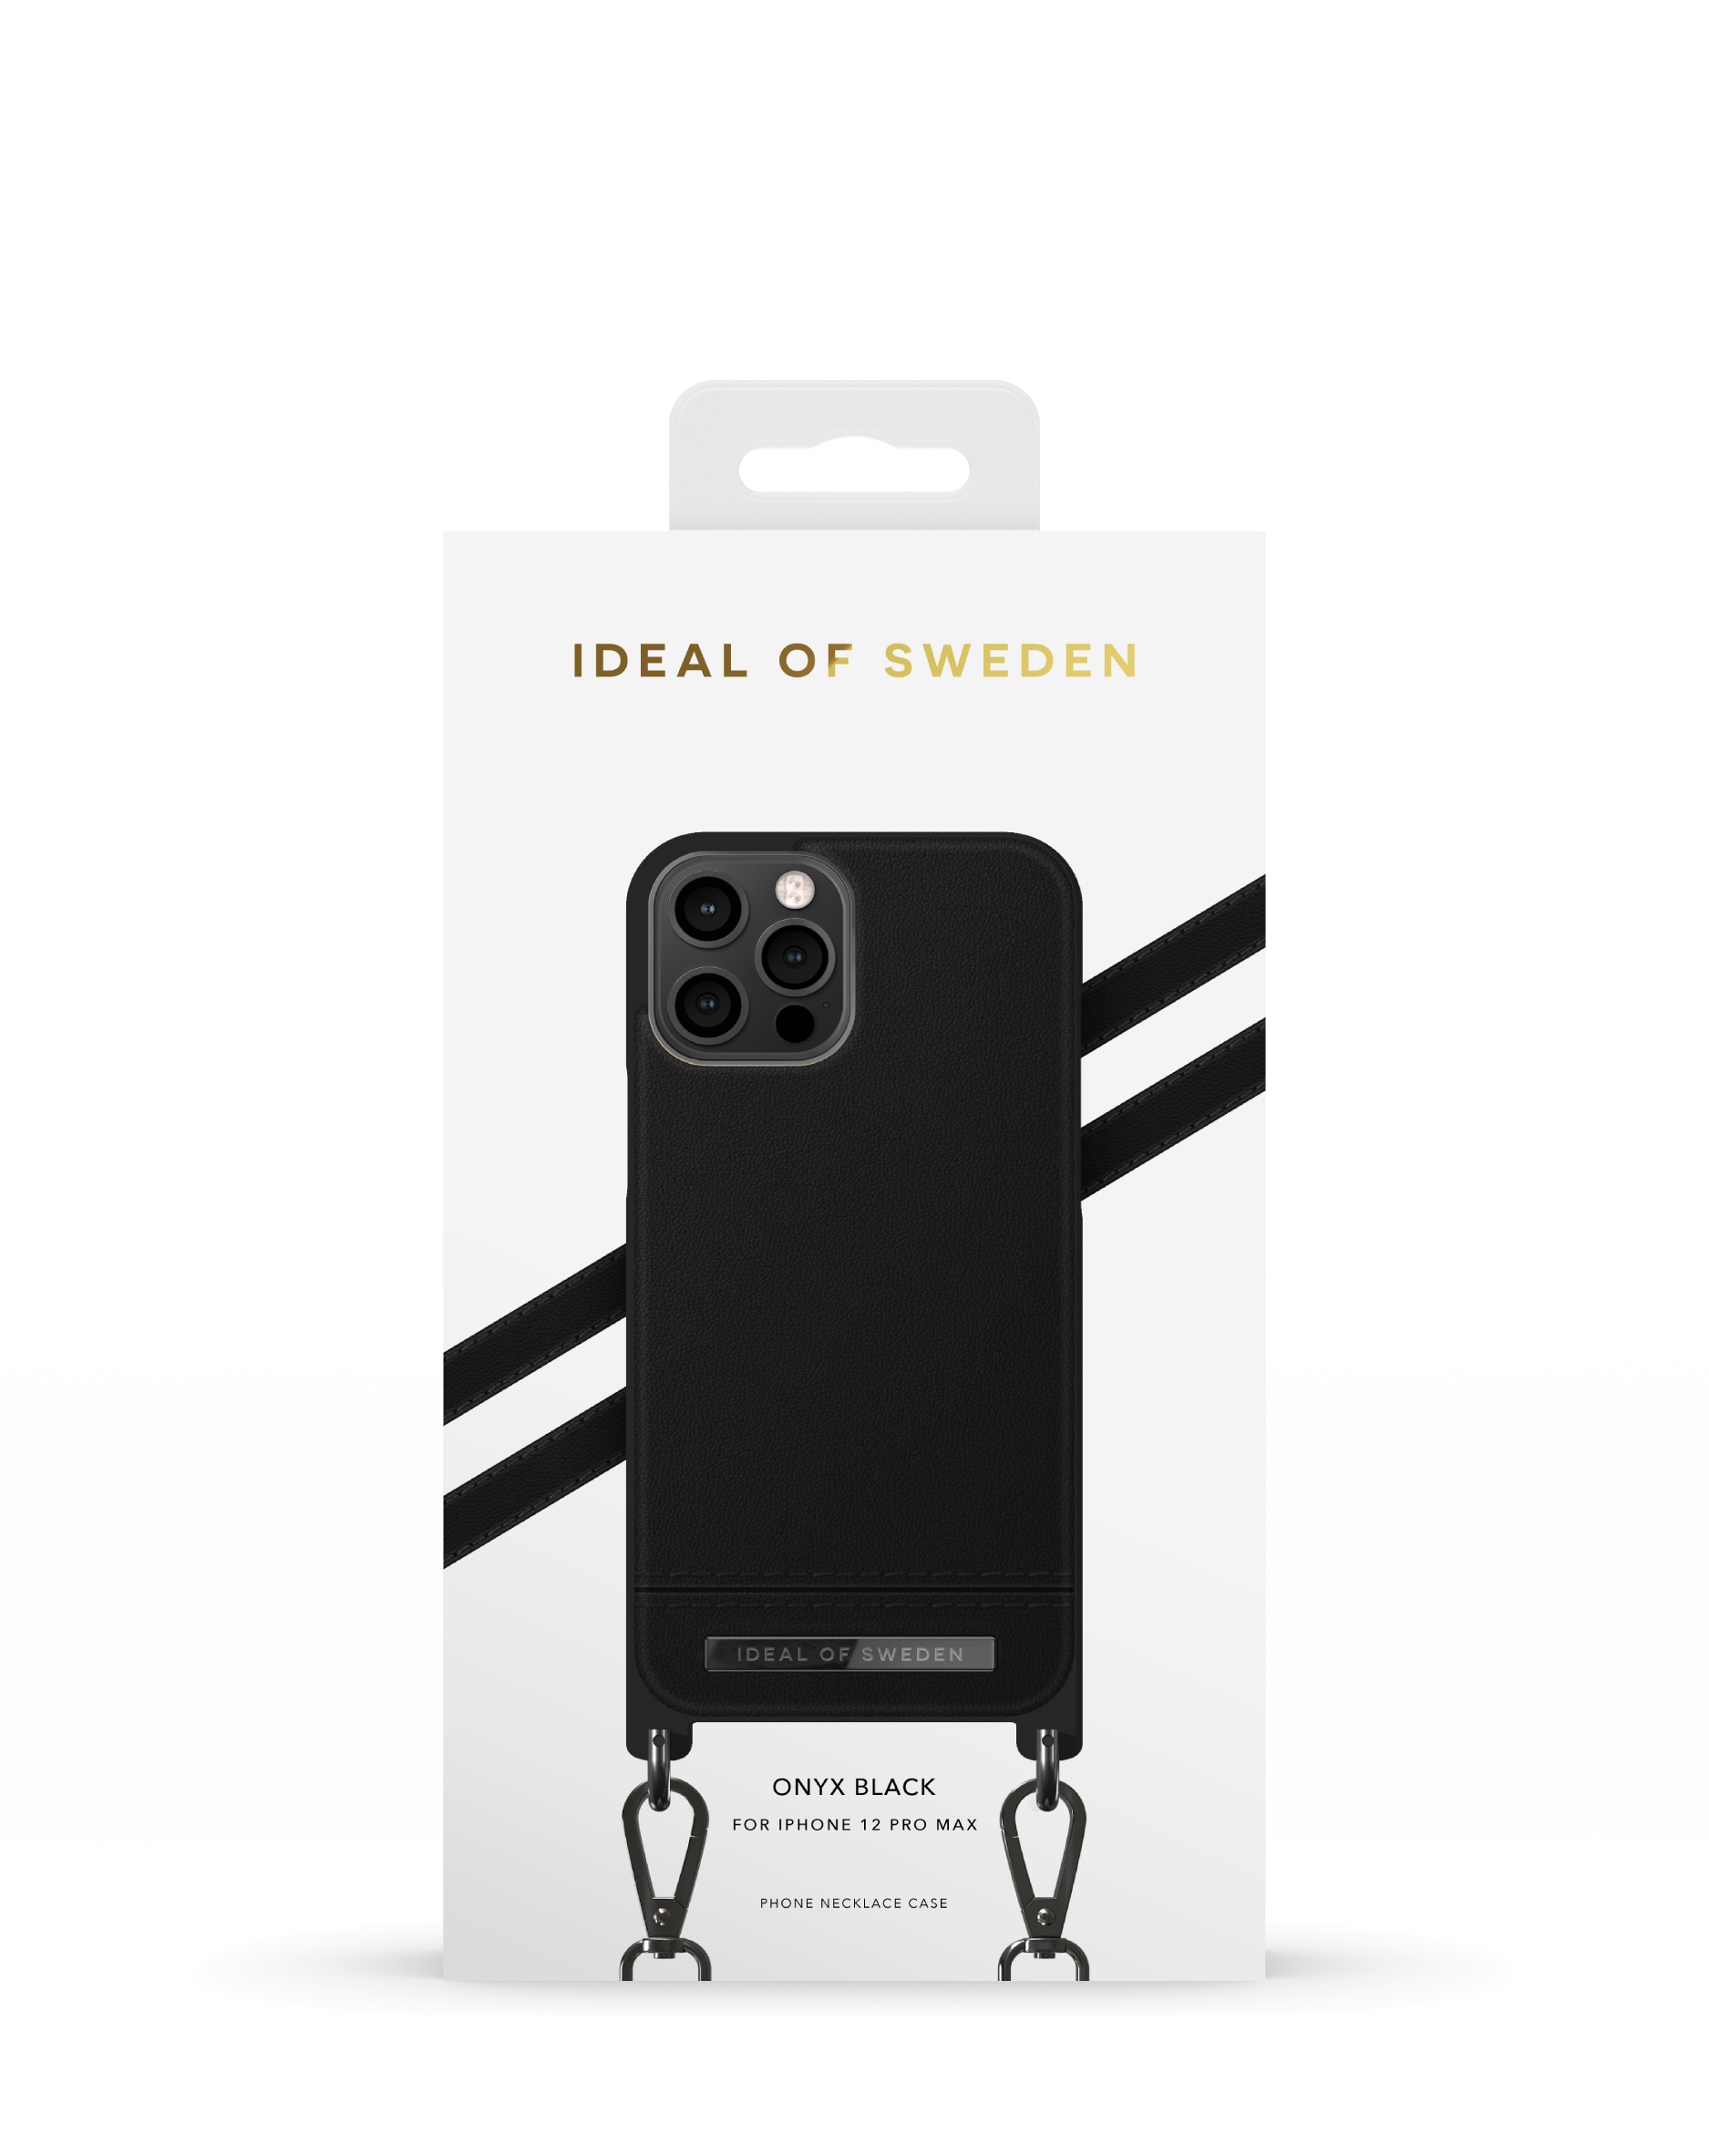 12 IDUWSS21-I2067, Apple, OF SWEDEN IDEAL Pro IPhone Bookcover, Black Onyx Max,